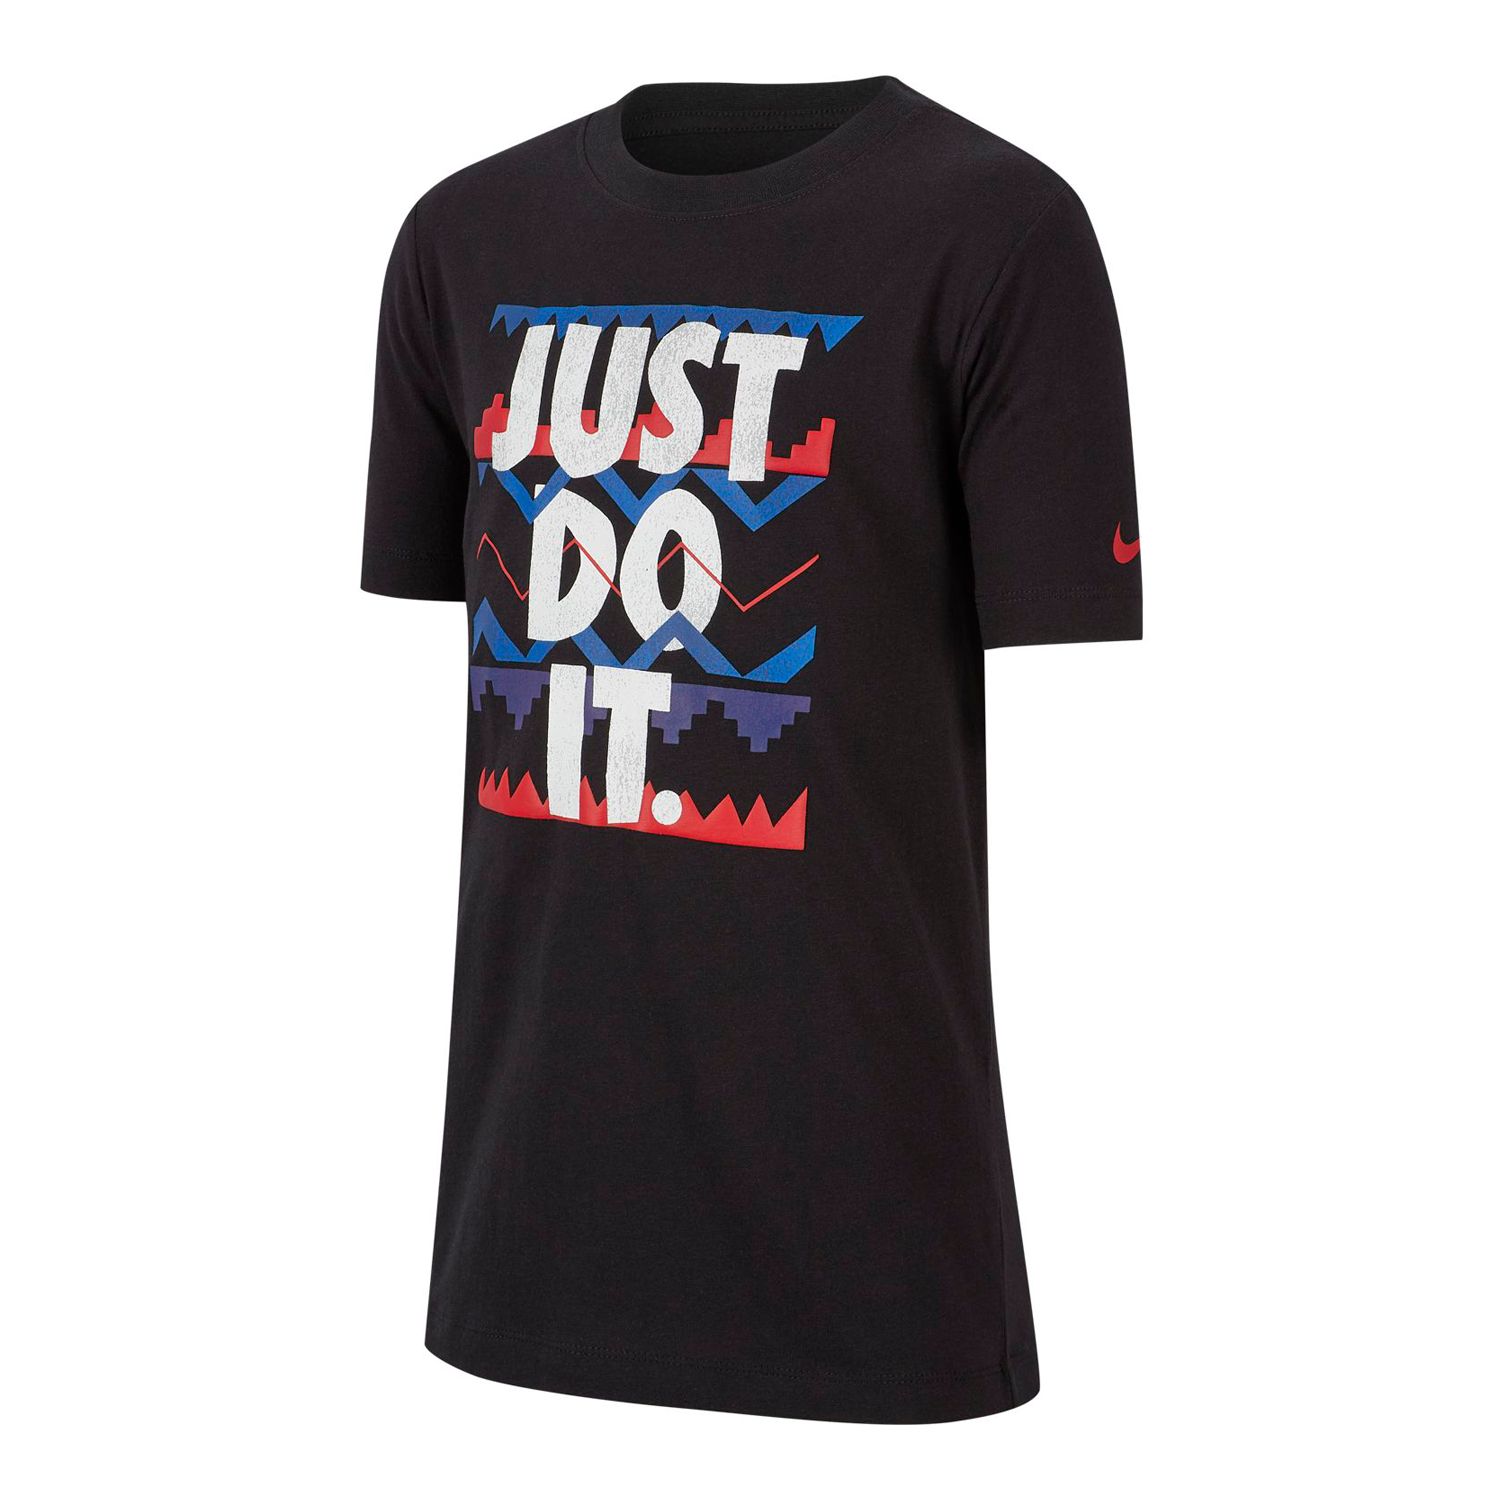 nike red white and blue shirt